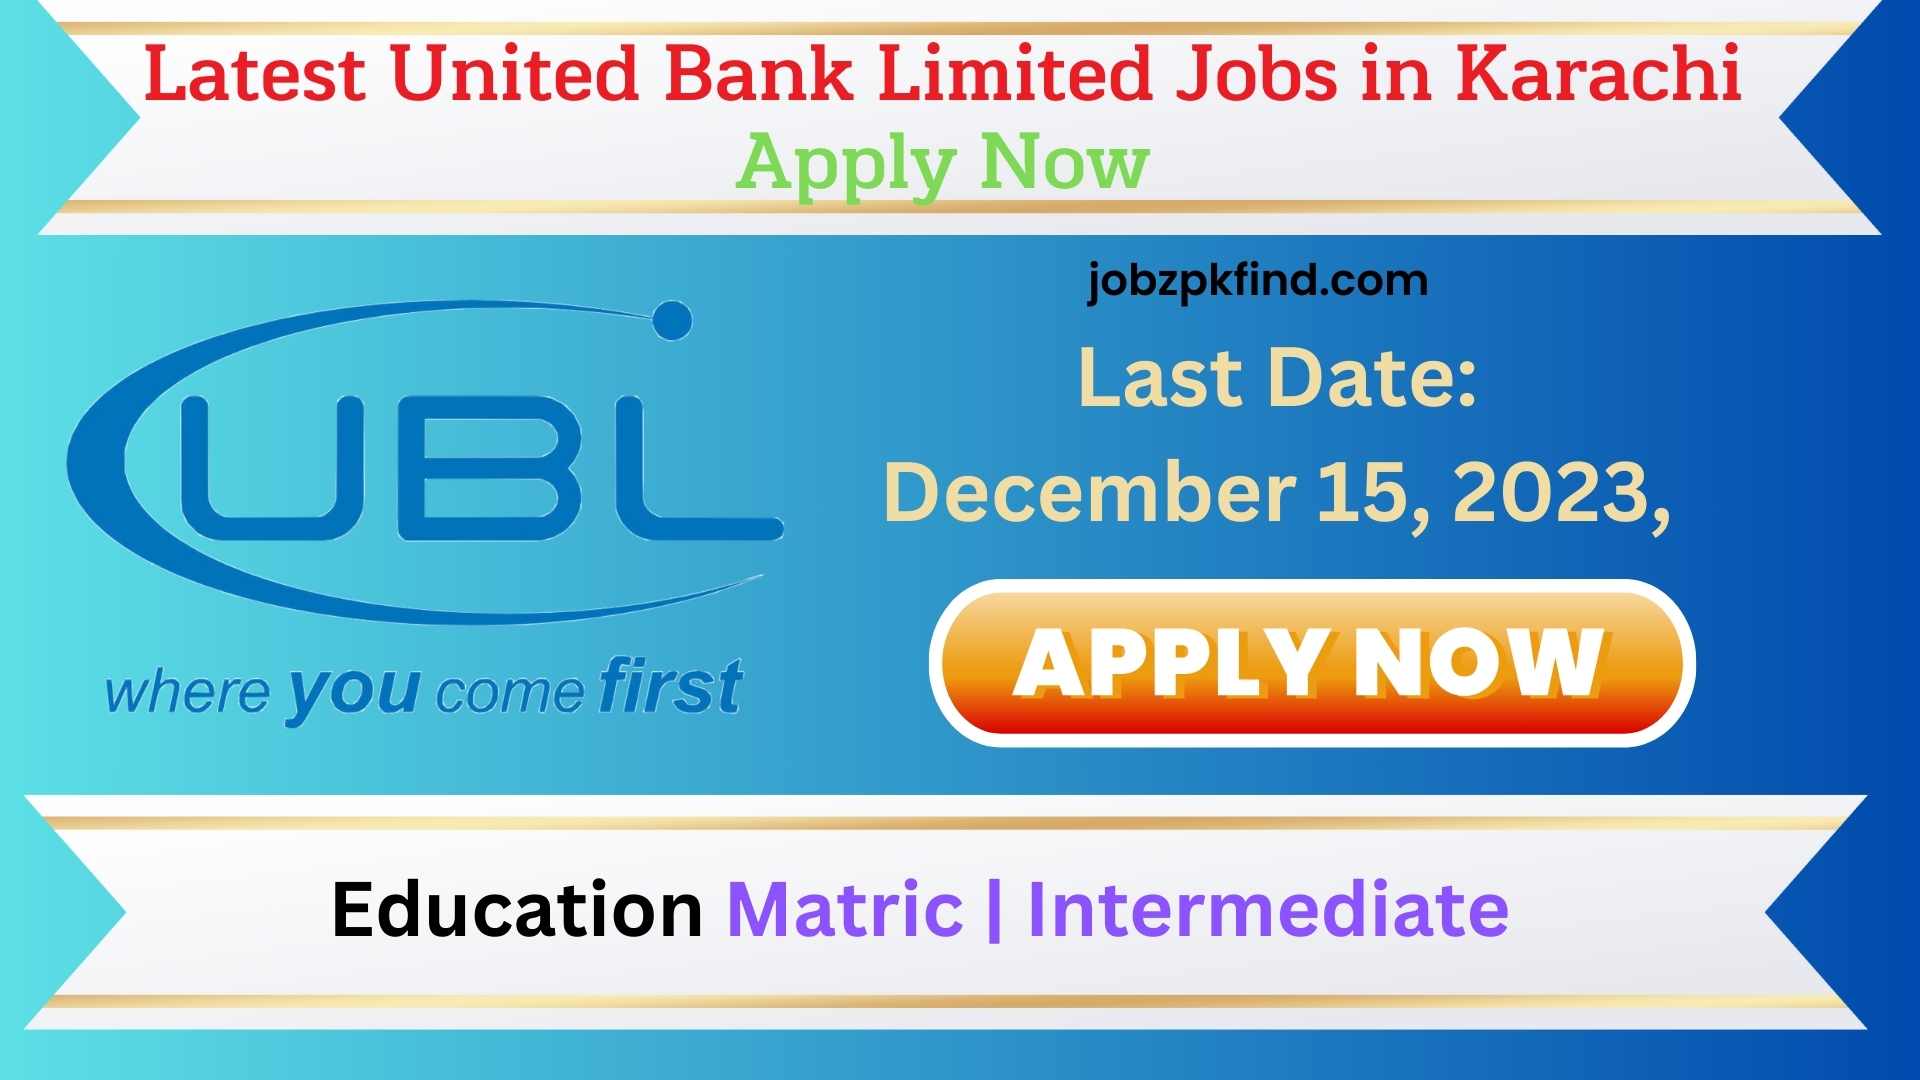 Latest United Bank Limited Jobs in Karachi 2023